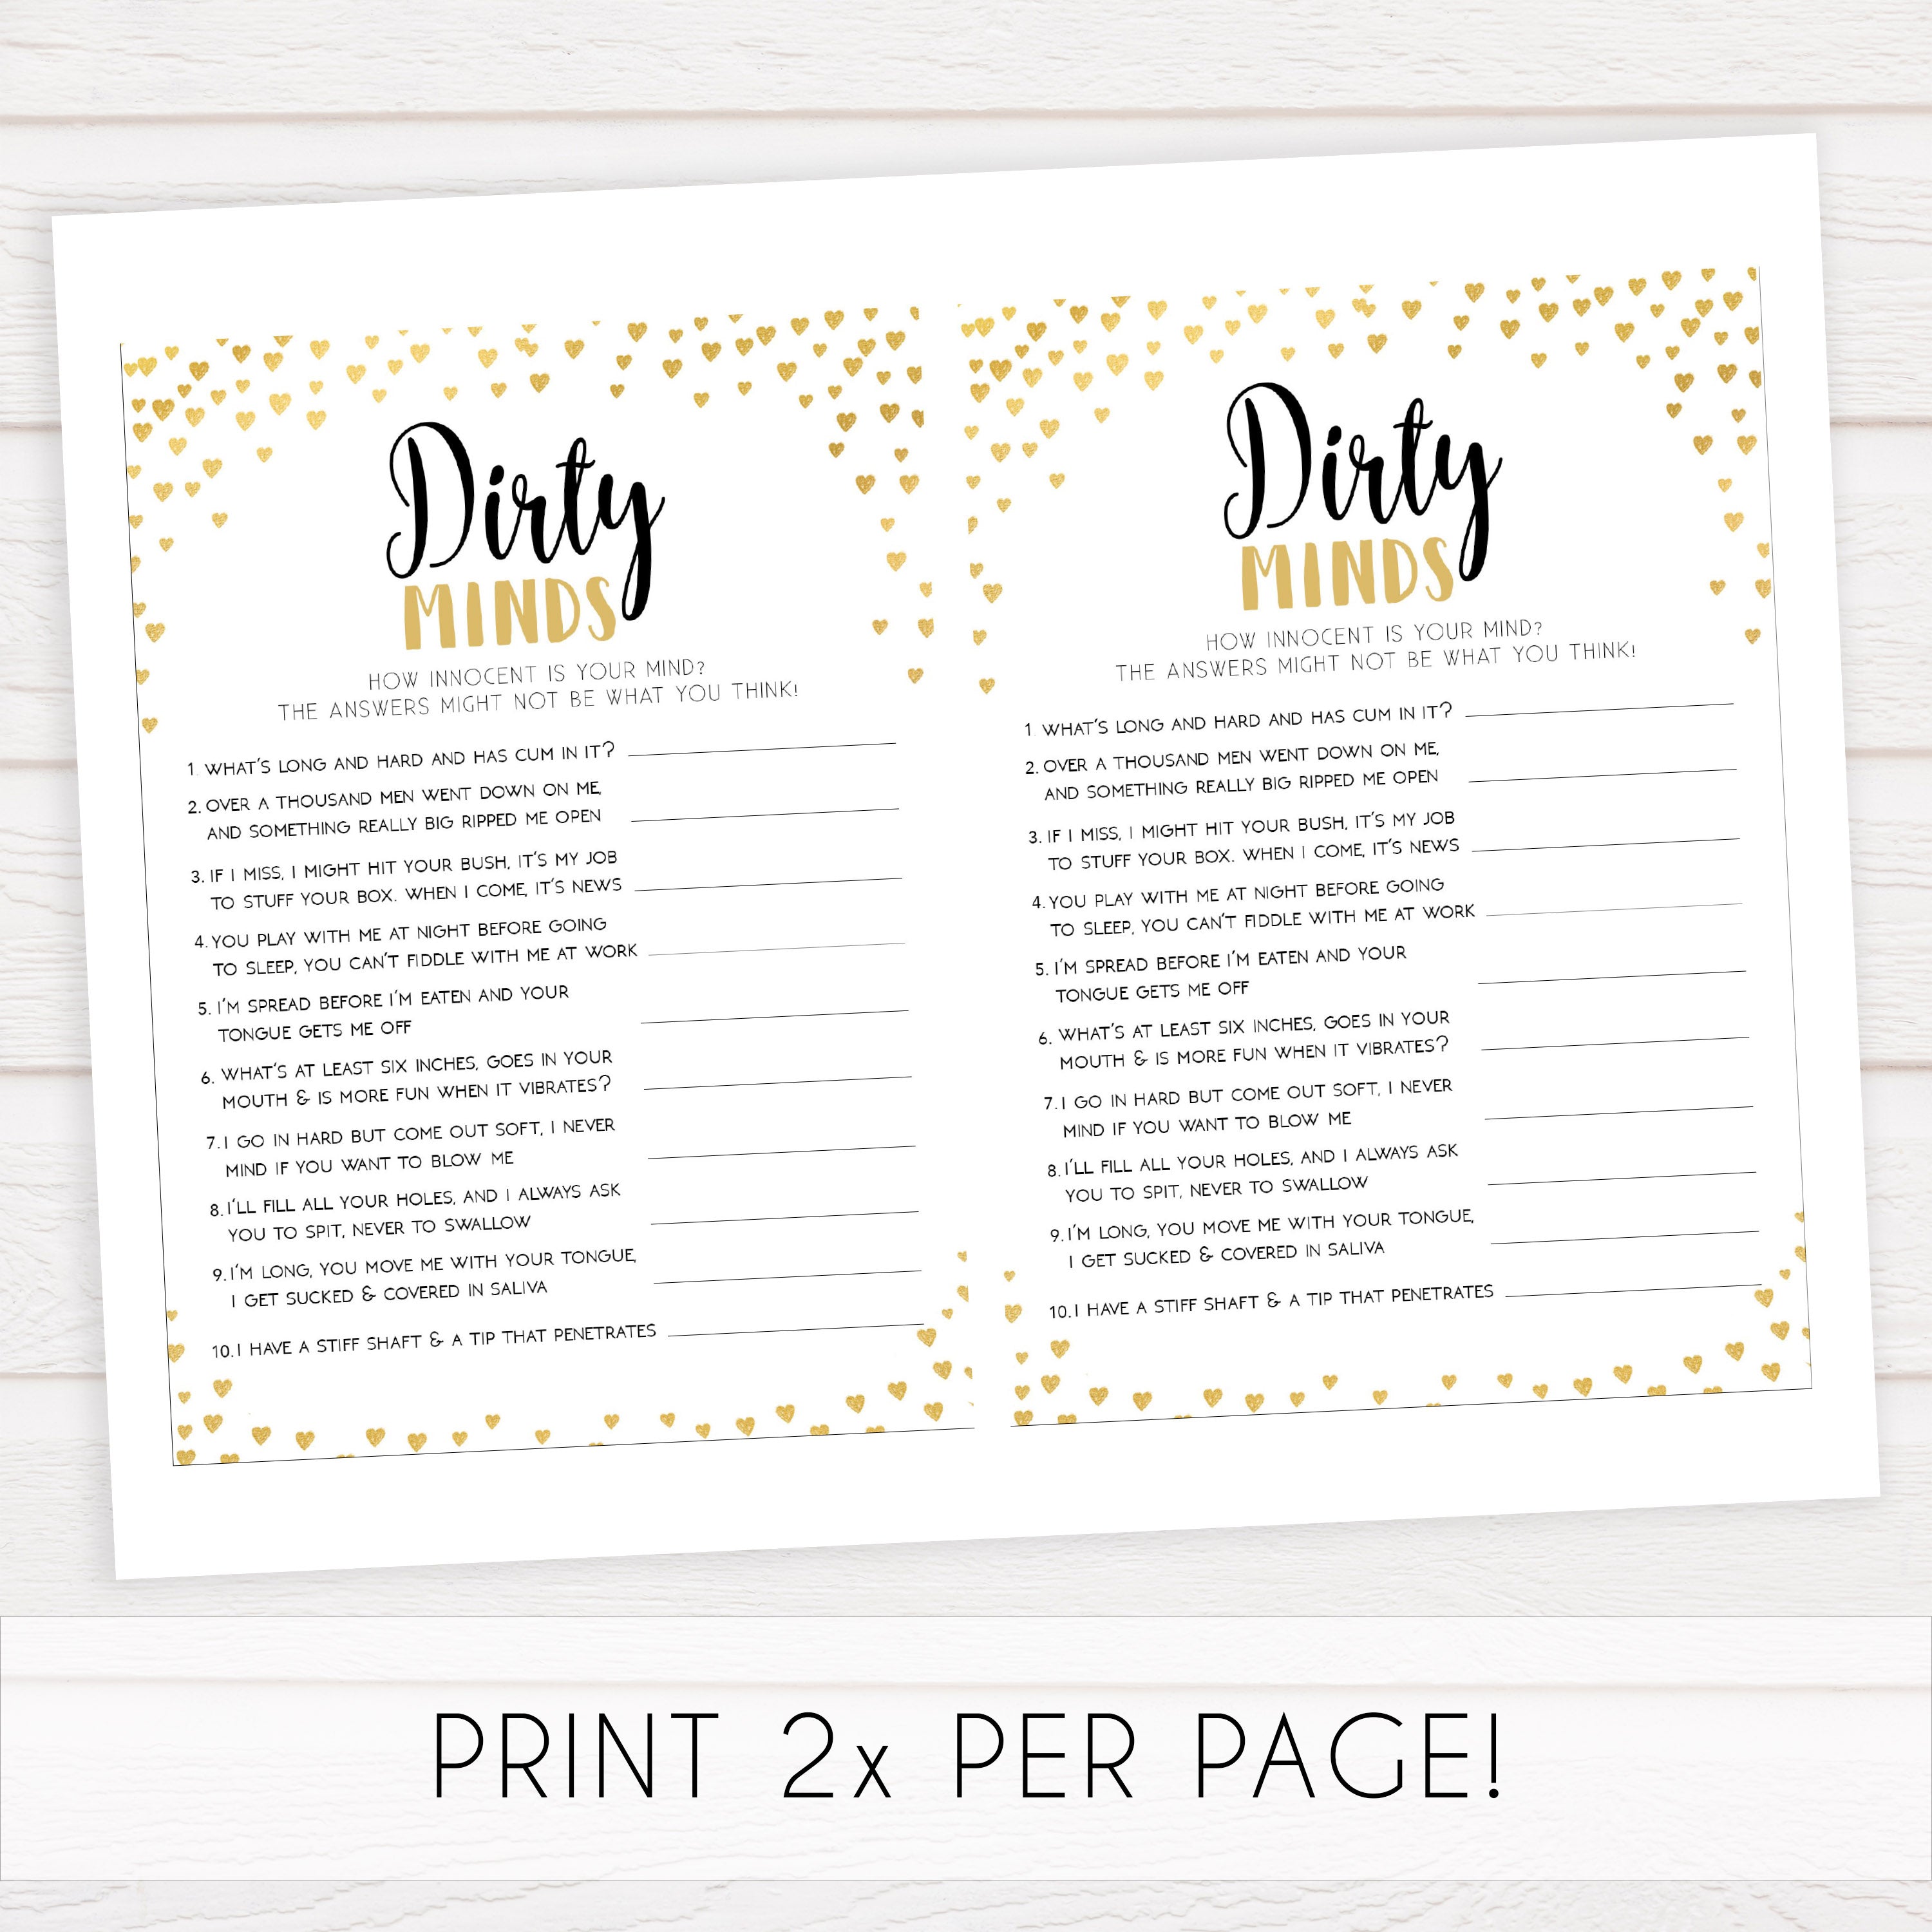 Gold hearts bachelorette games, dirty minds game, printable bachelorette games, hen party games, top party games, fun bridal shower games, bachelorette party games